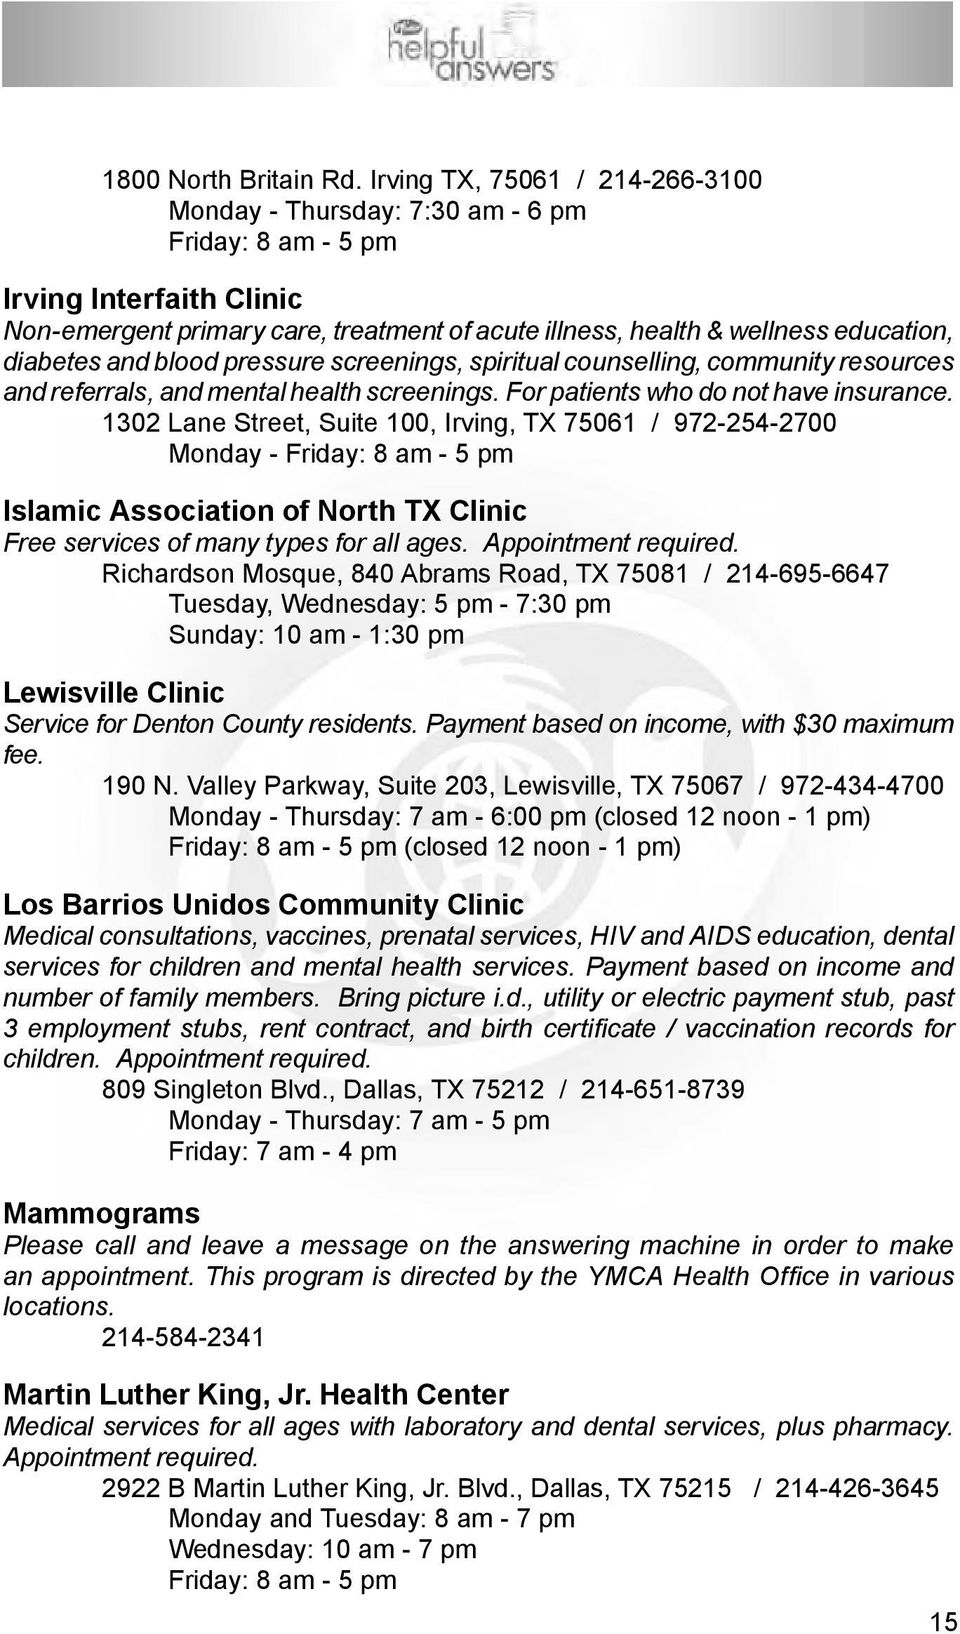 diabetes and blood pressure screenings, spiritual counsel ling, community resources and referrals, and mental health screenings. For patients who do not have insurance.